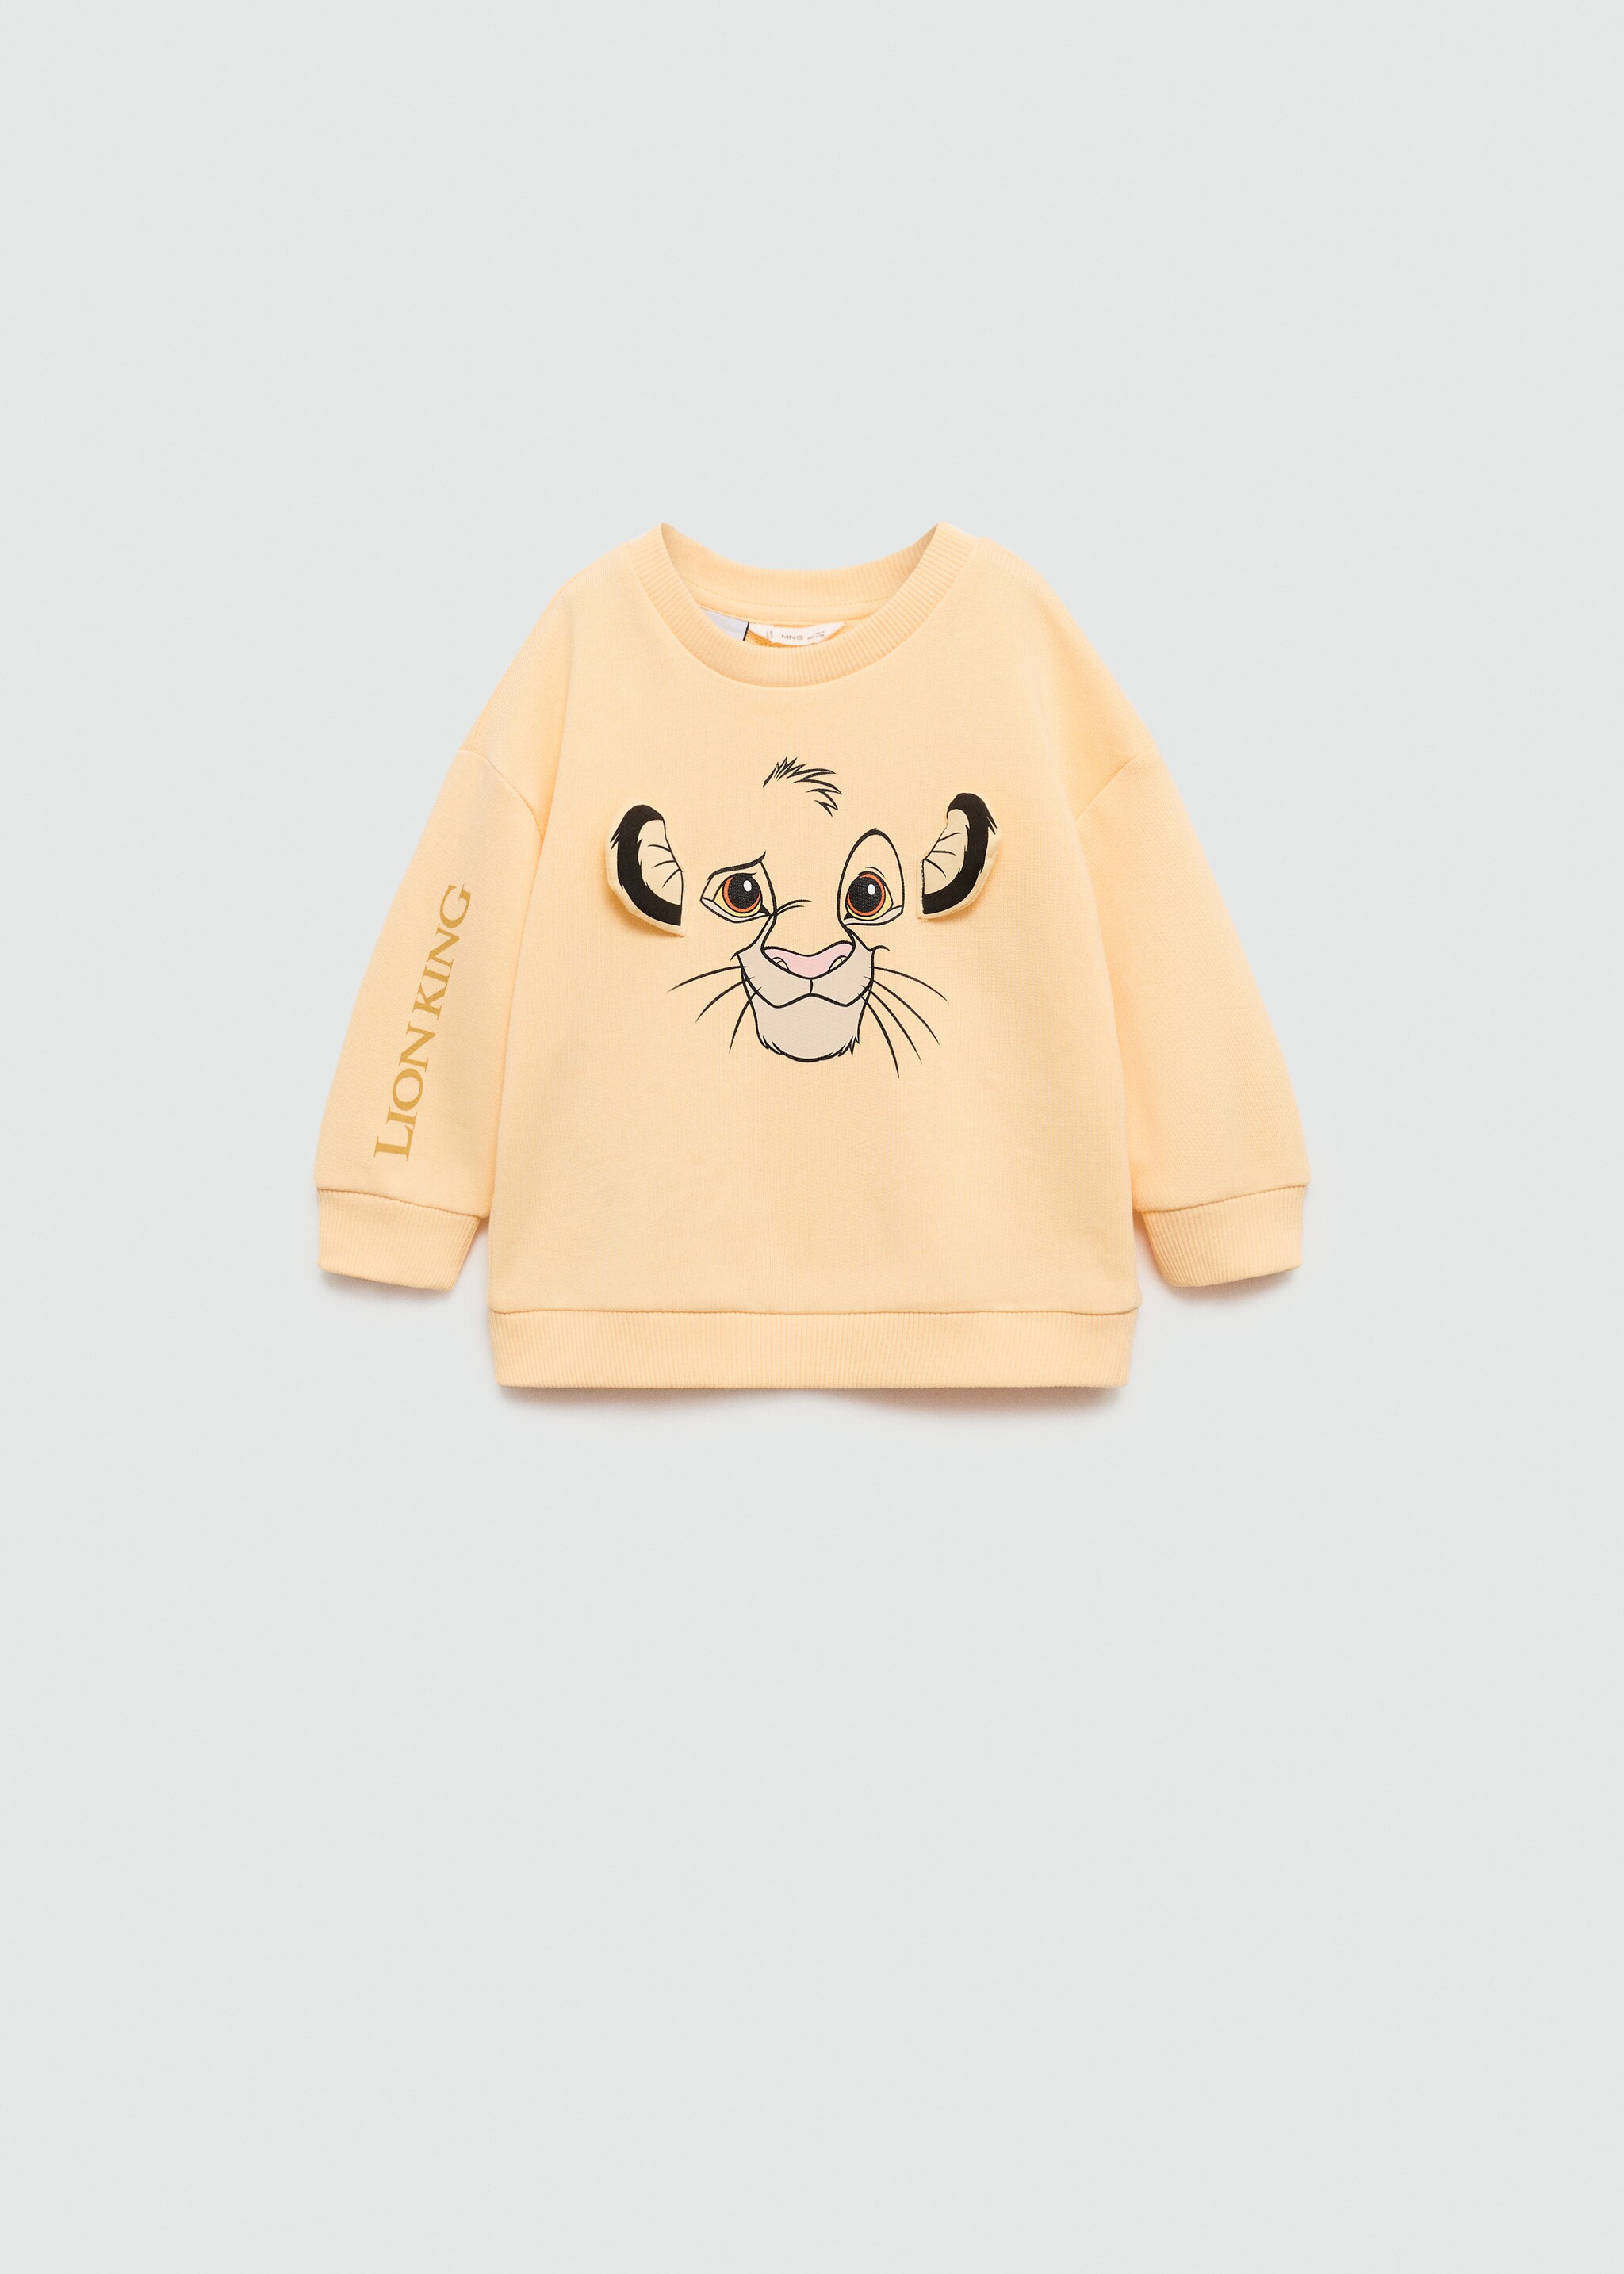 Lion King Sweatshirt - Article without model